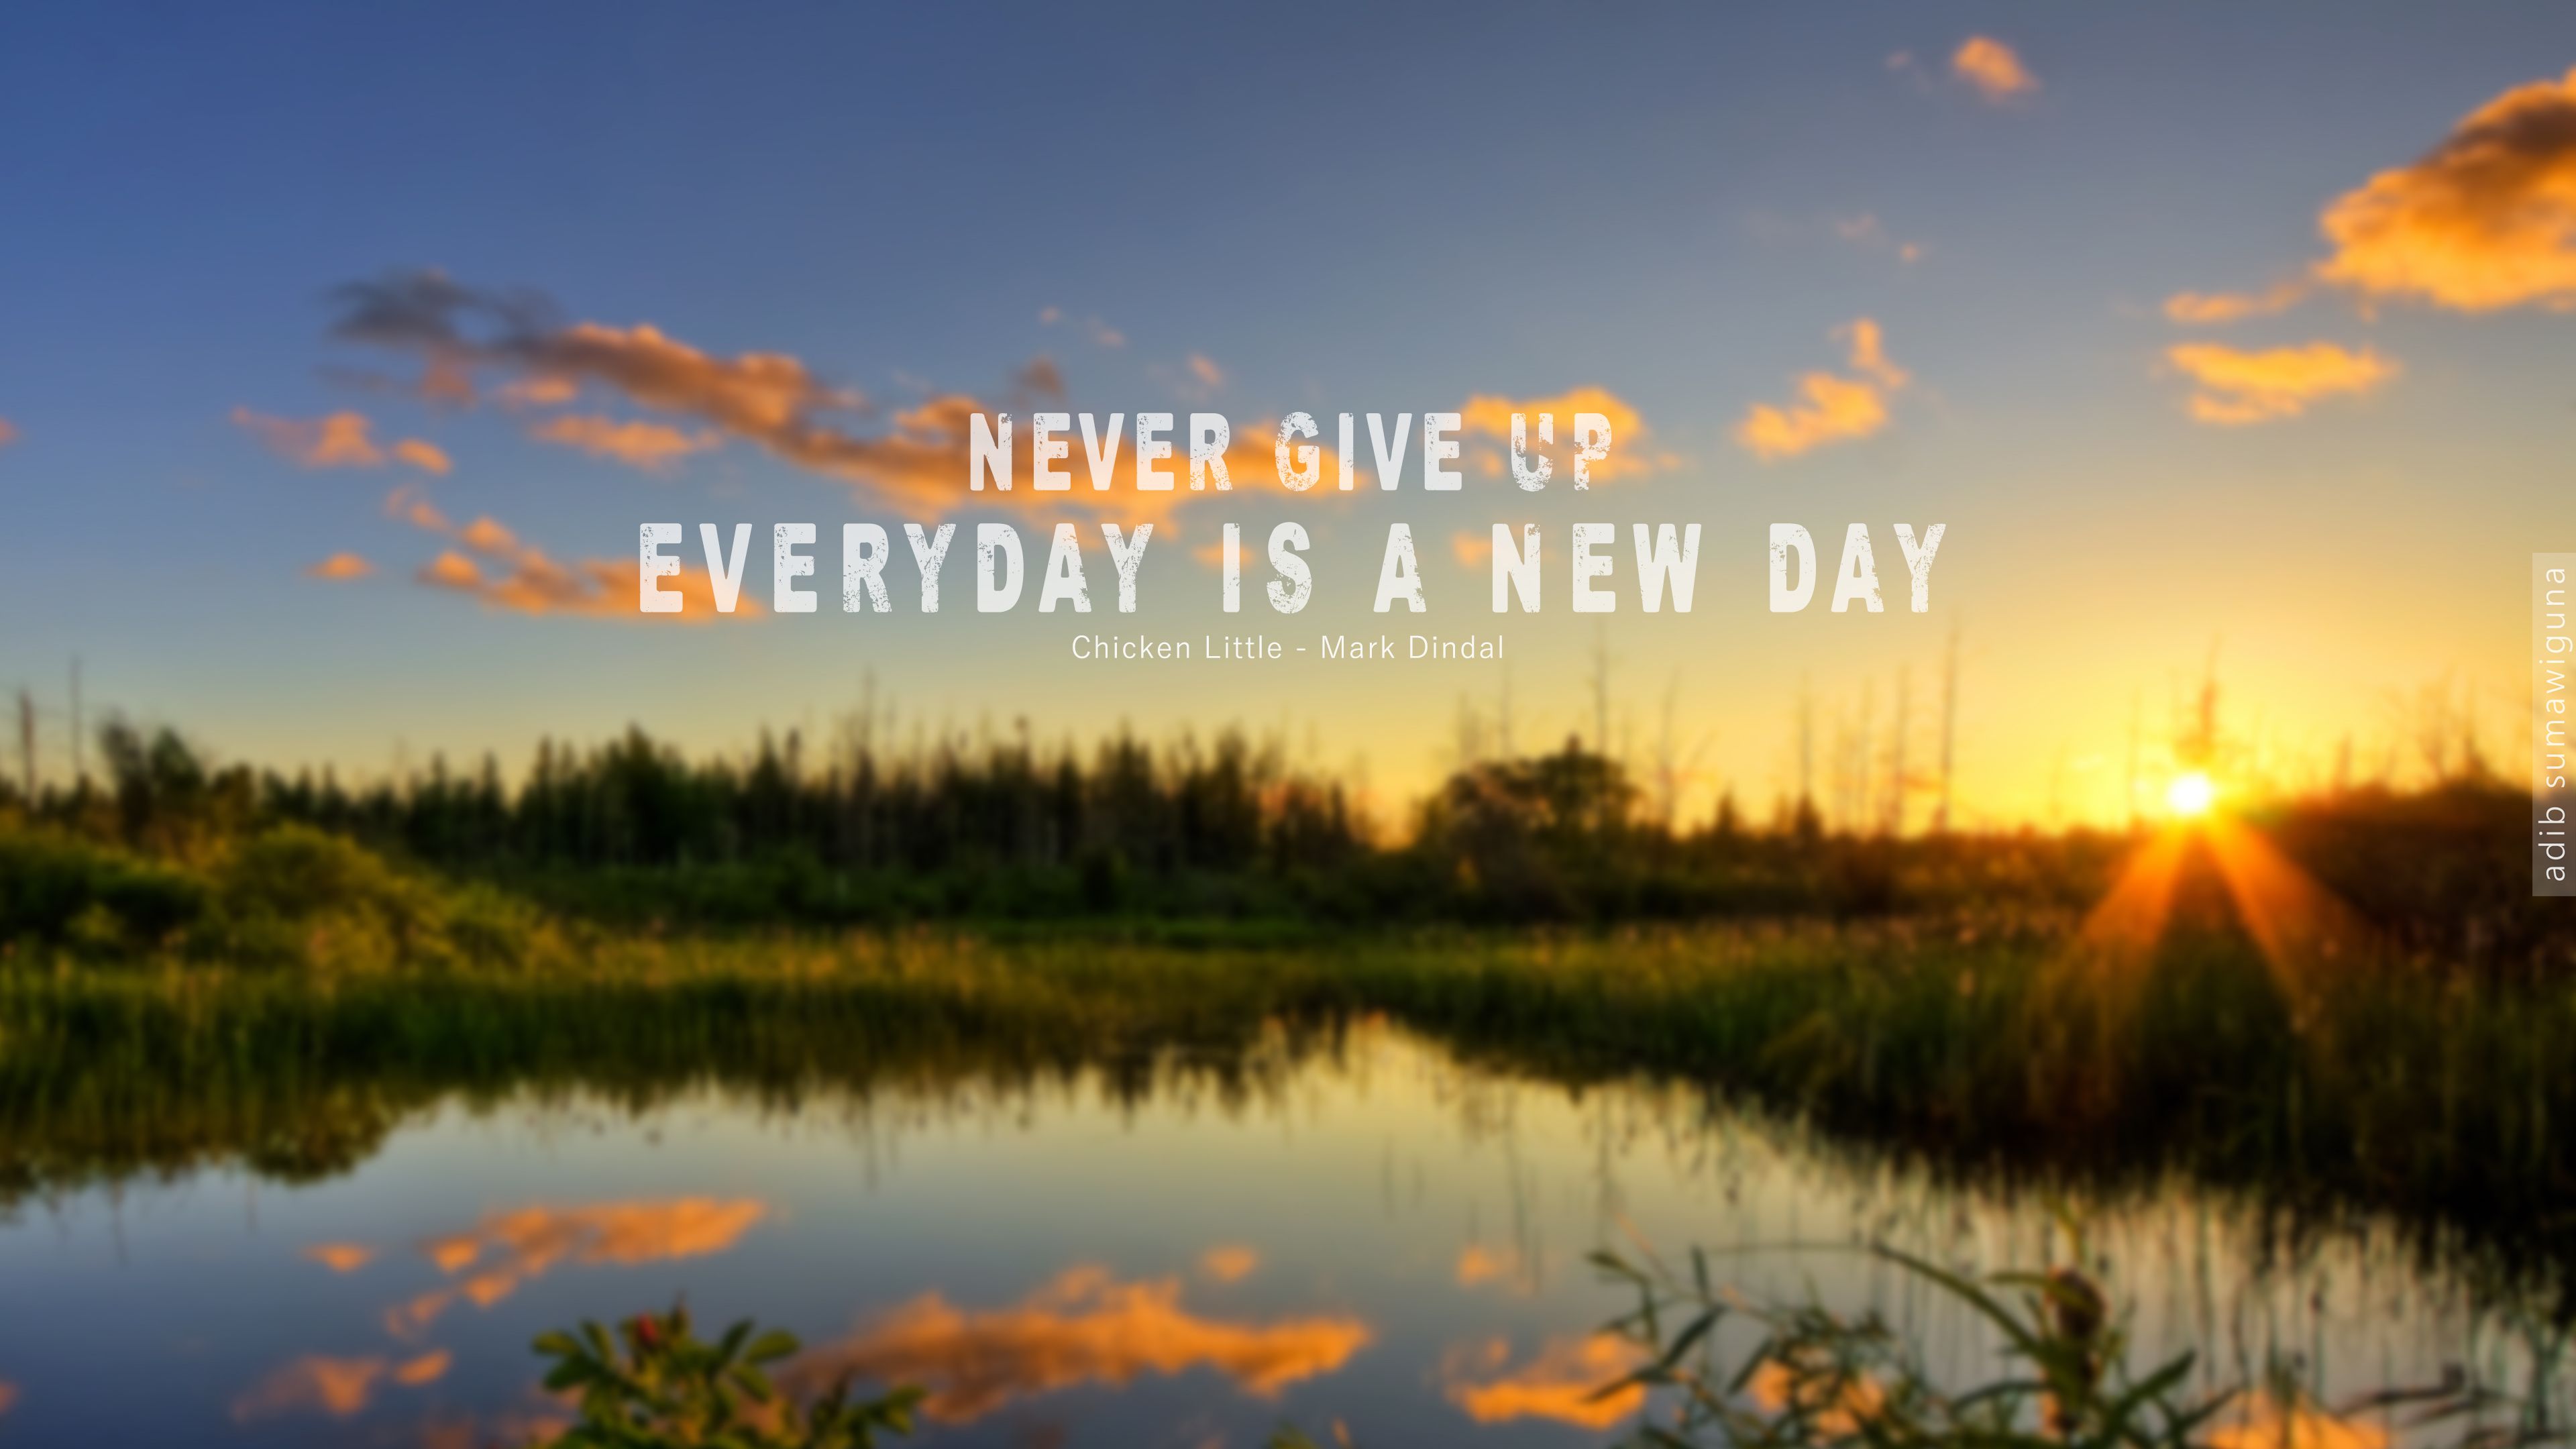 never_give_up_hd_wallpaper_by_adib_27-d94ub1p.jpg